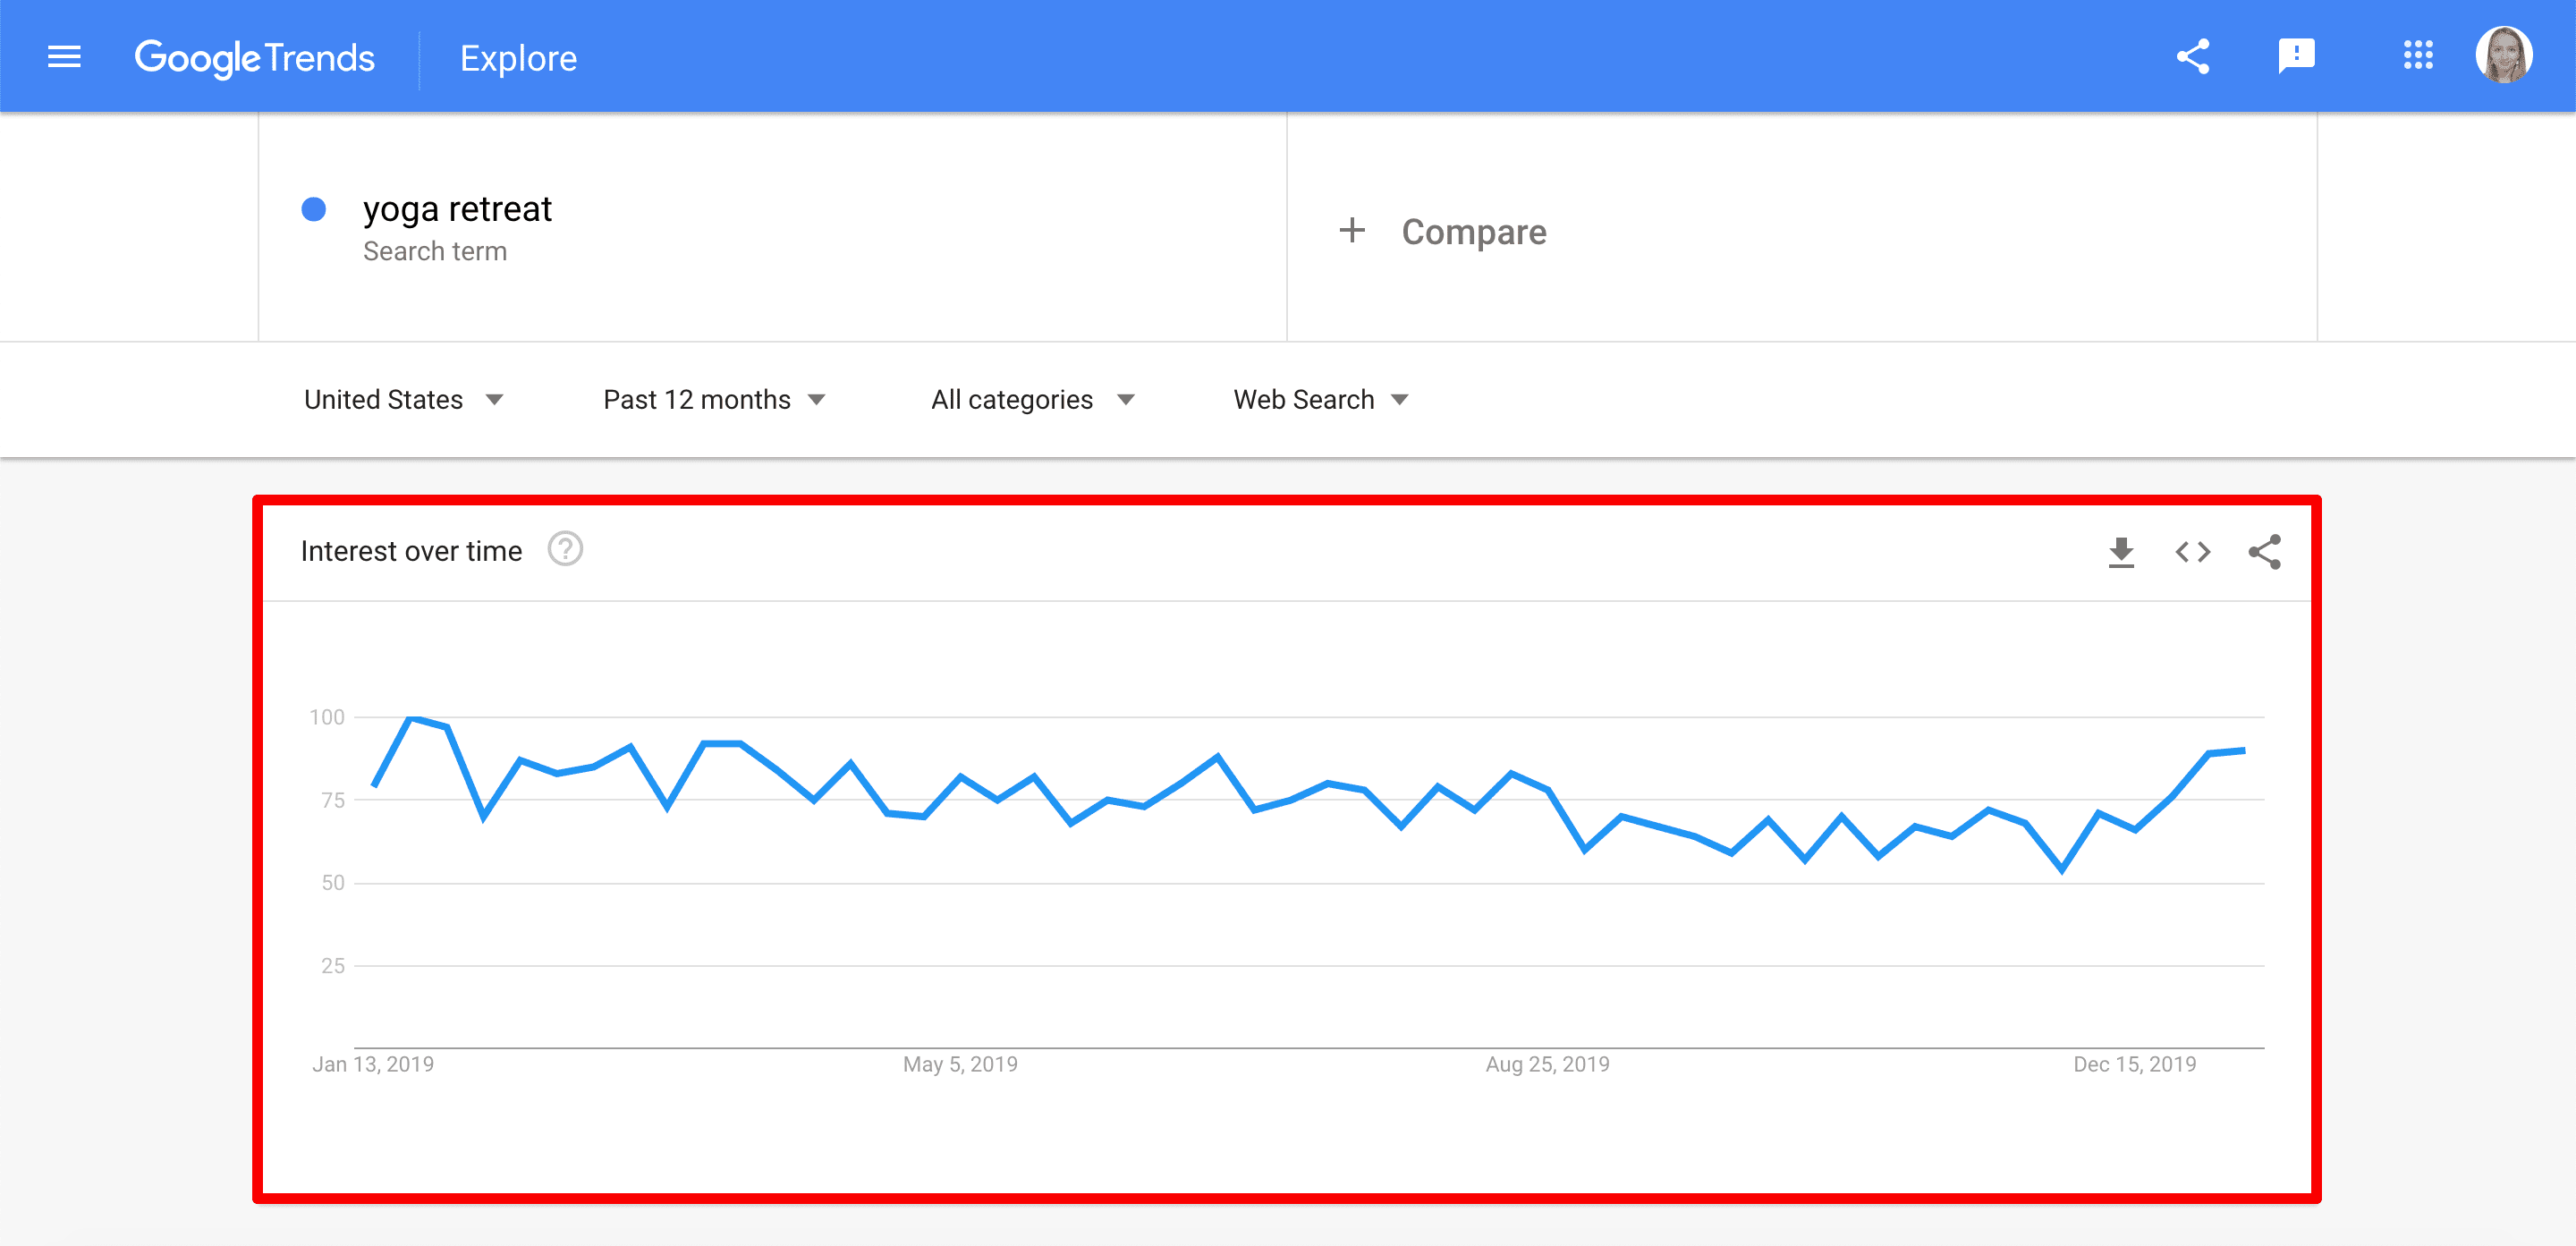 Interest over time graph in Google Trends